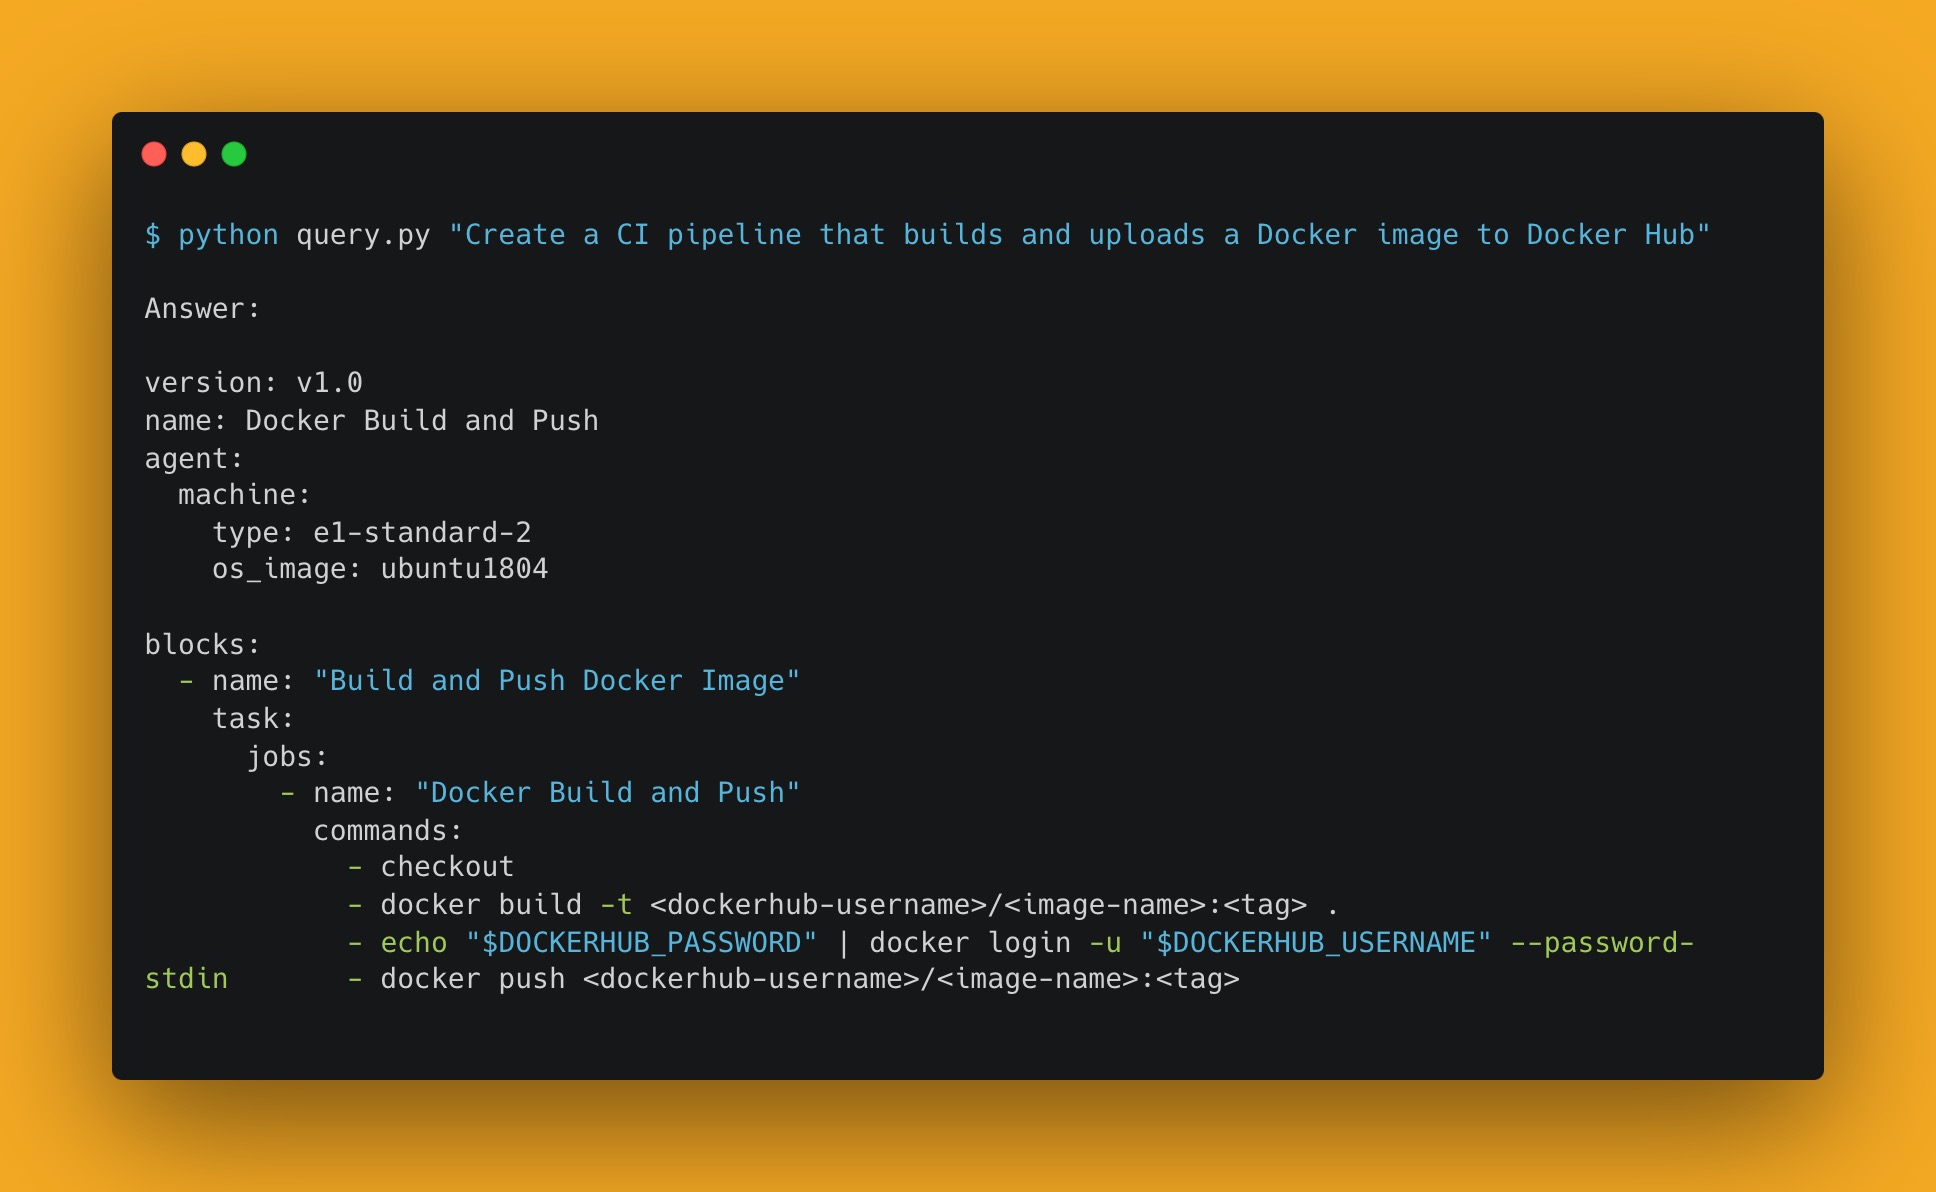 Screenshot of the running program. On the screen, the command is executed: python query.py "Create a CI pipeline that builds and uploads a Docker image to Docker Hub", and the program prints out YAML corresponding to a CI pipeline that performs the requested action.